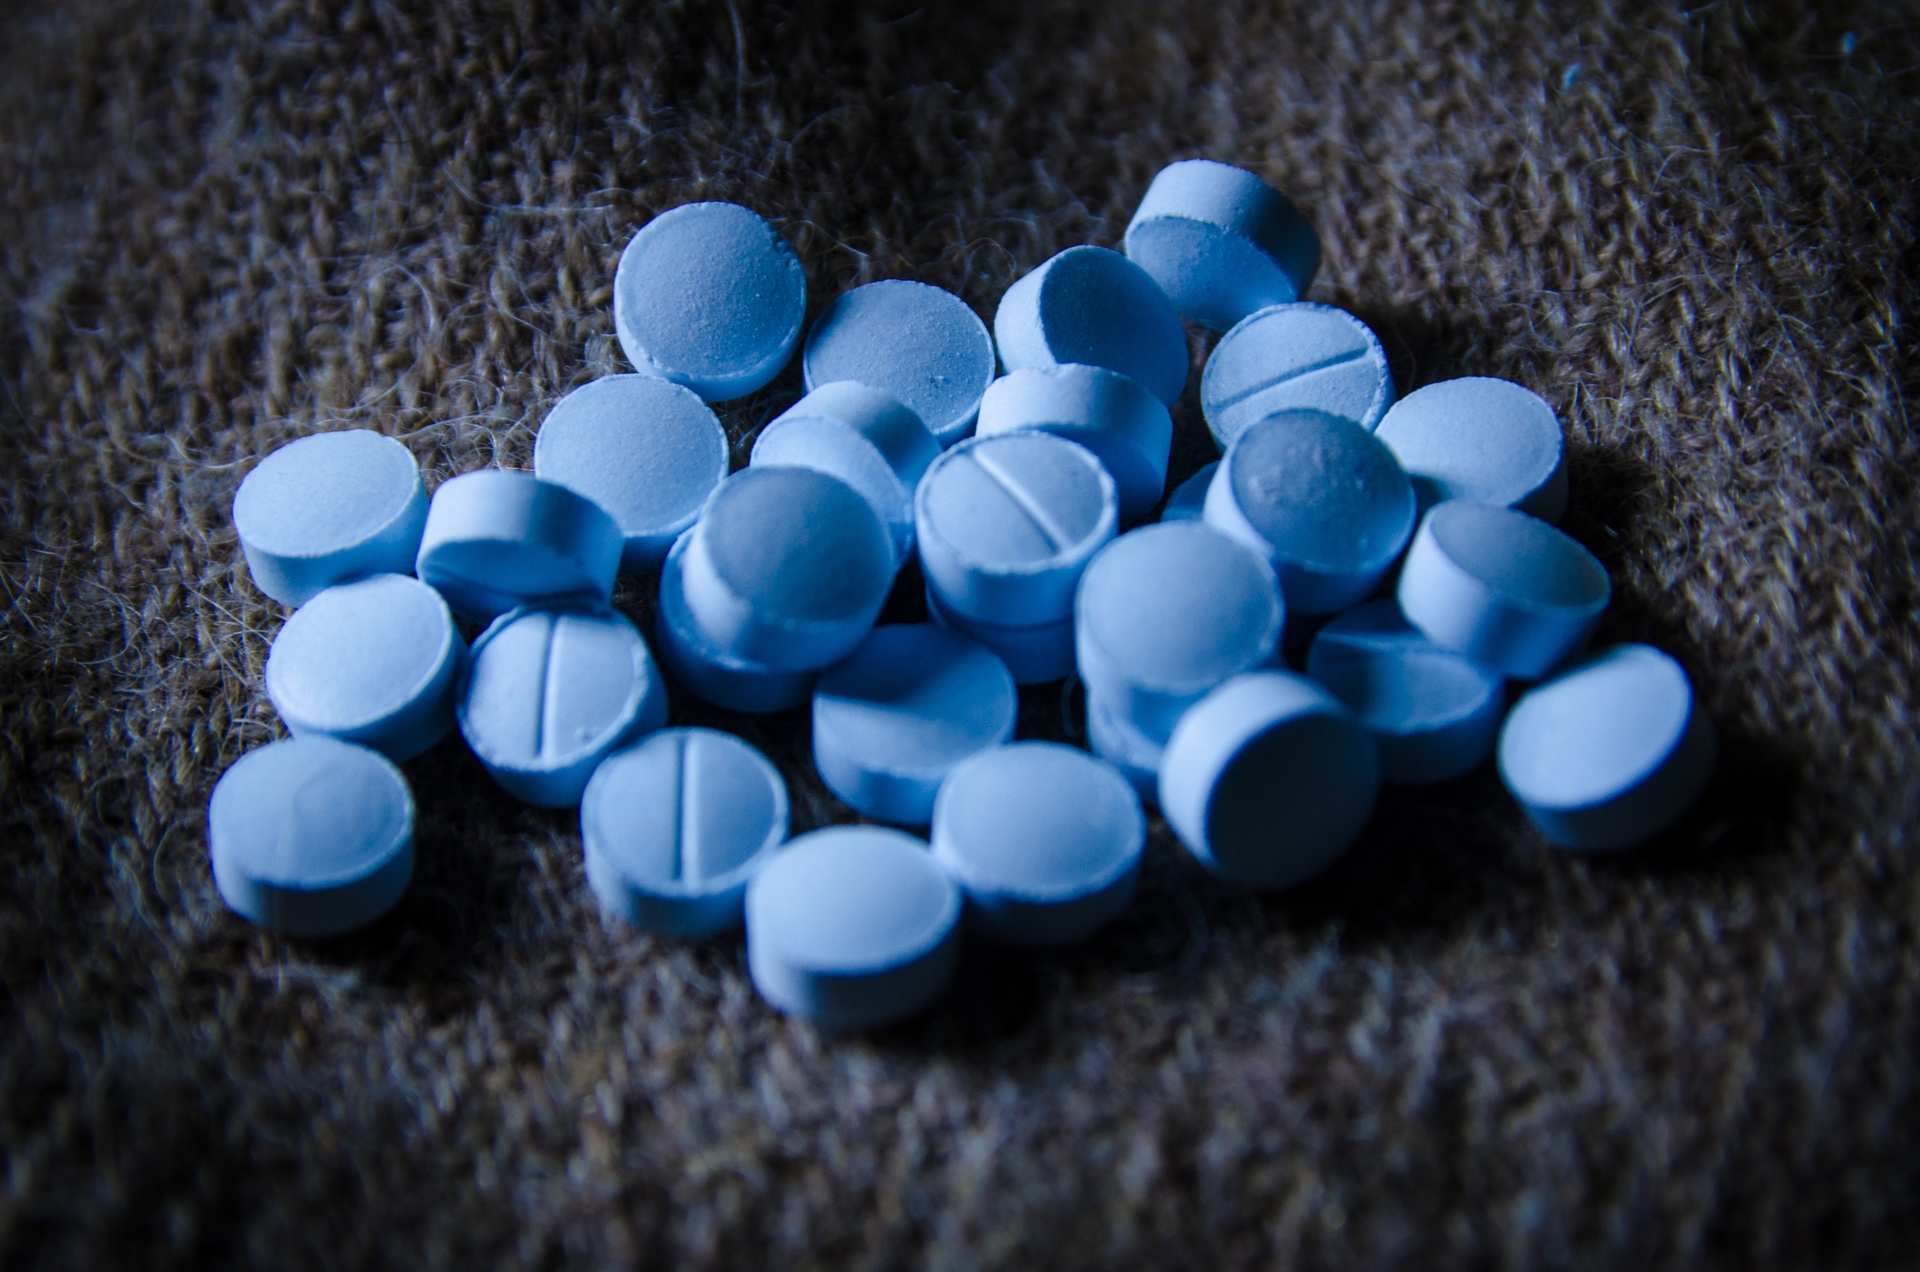 Known as benzos, blues, diazepam or valium, the drugs account for 918 deaths.